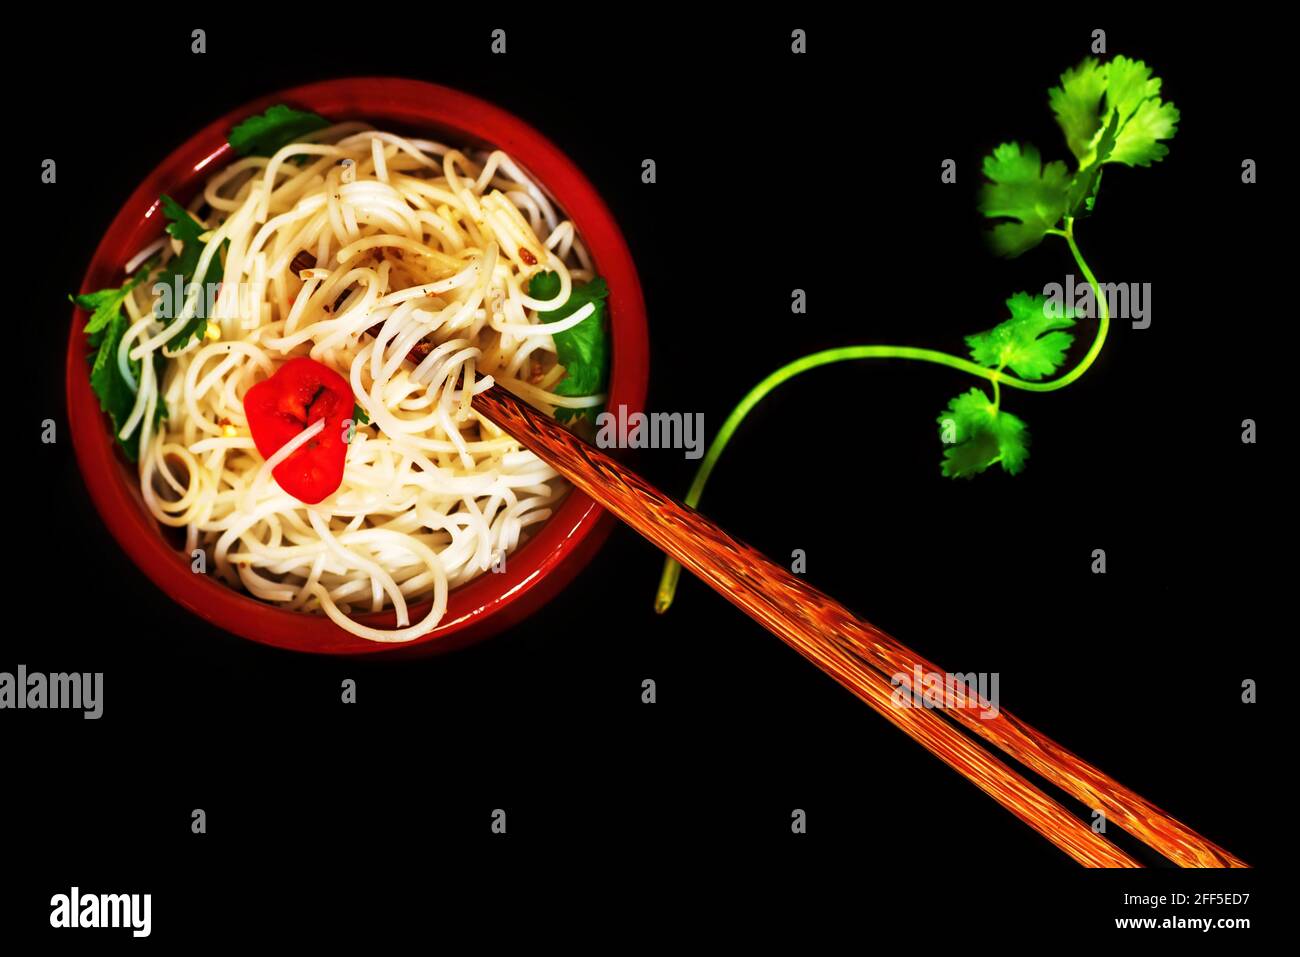 Ceramic bowl with boiled noodles, herbs, chili and pepper, fresh green coriander leaf and chopsticks on black background. Asian noodle. Stock Photo